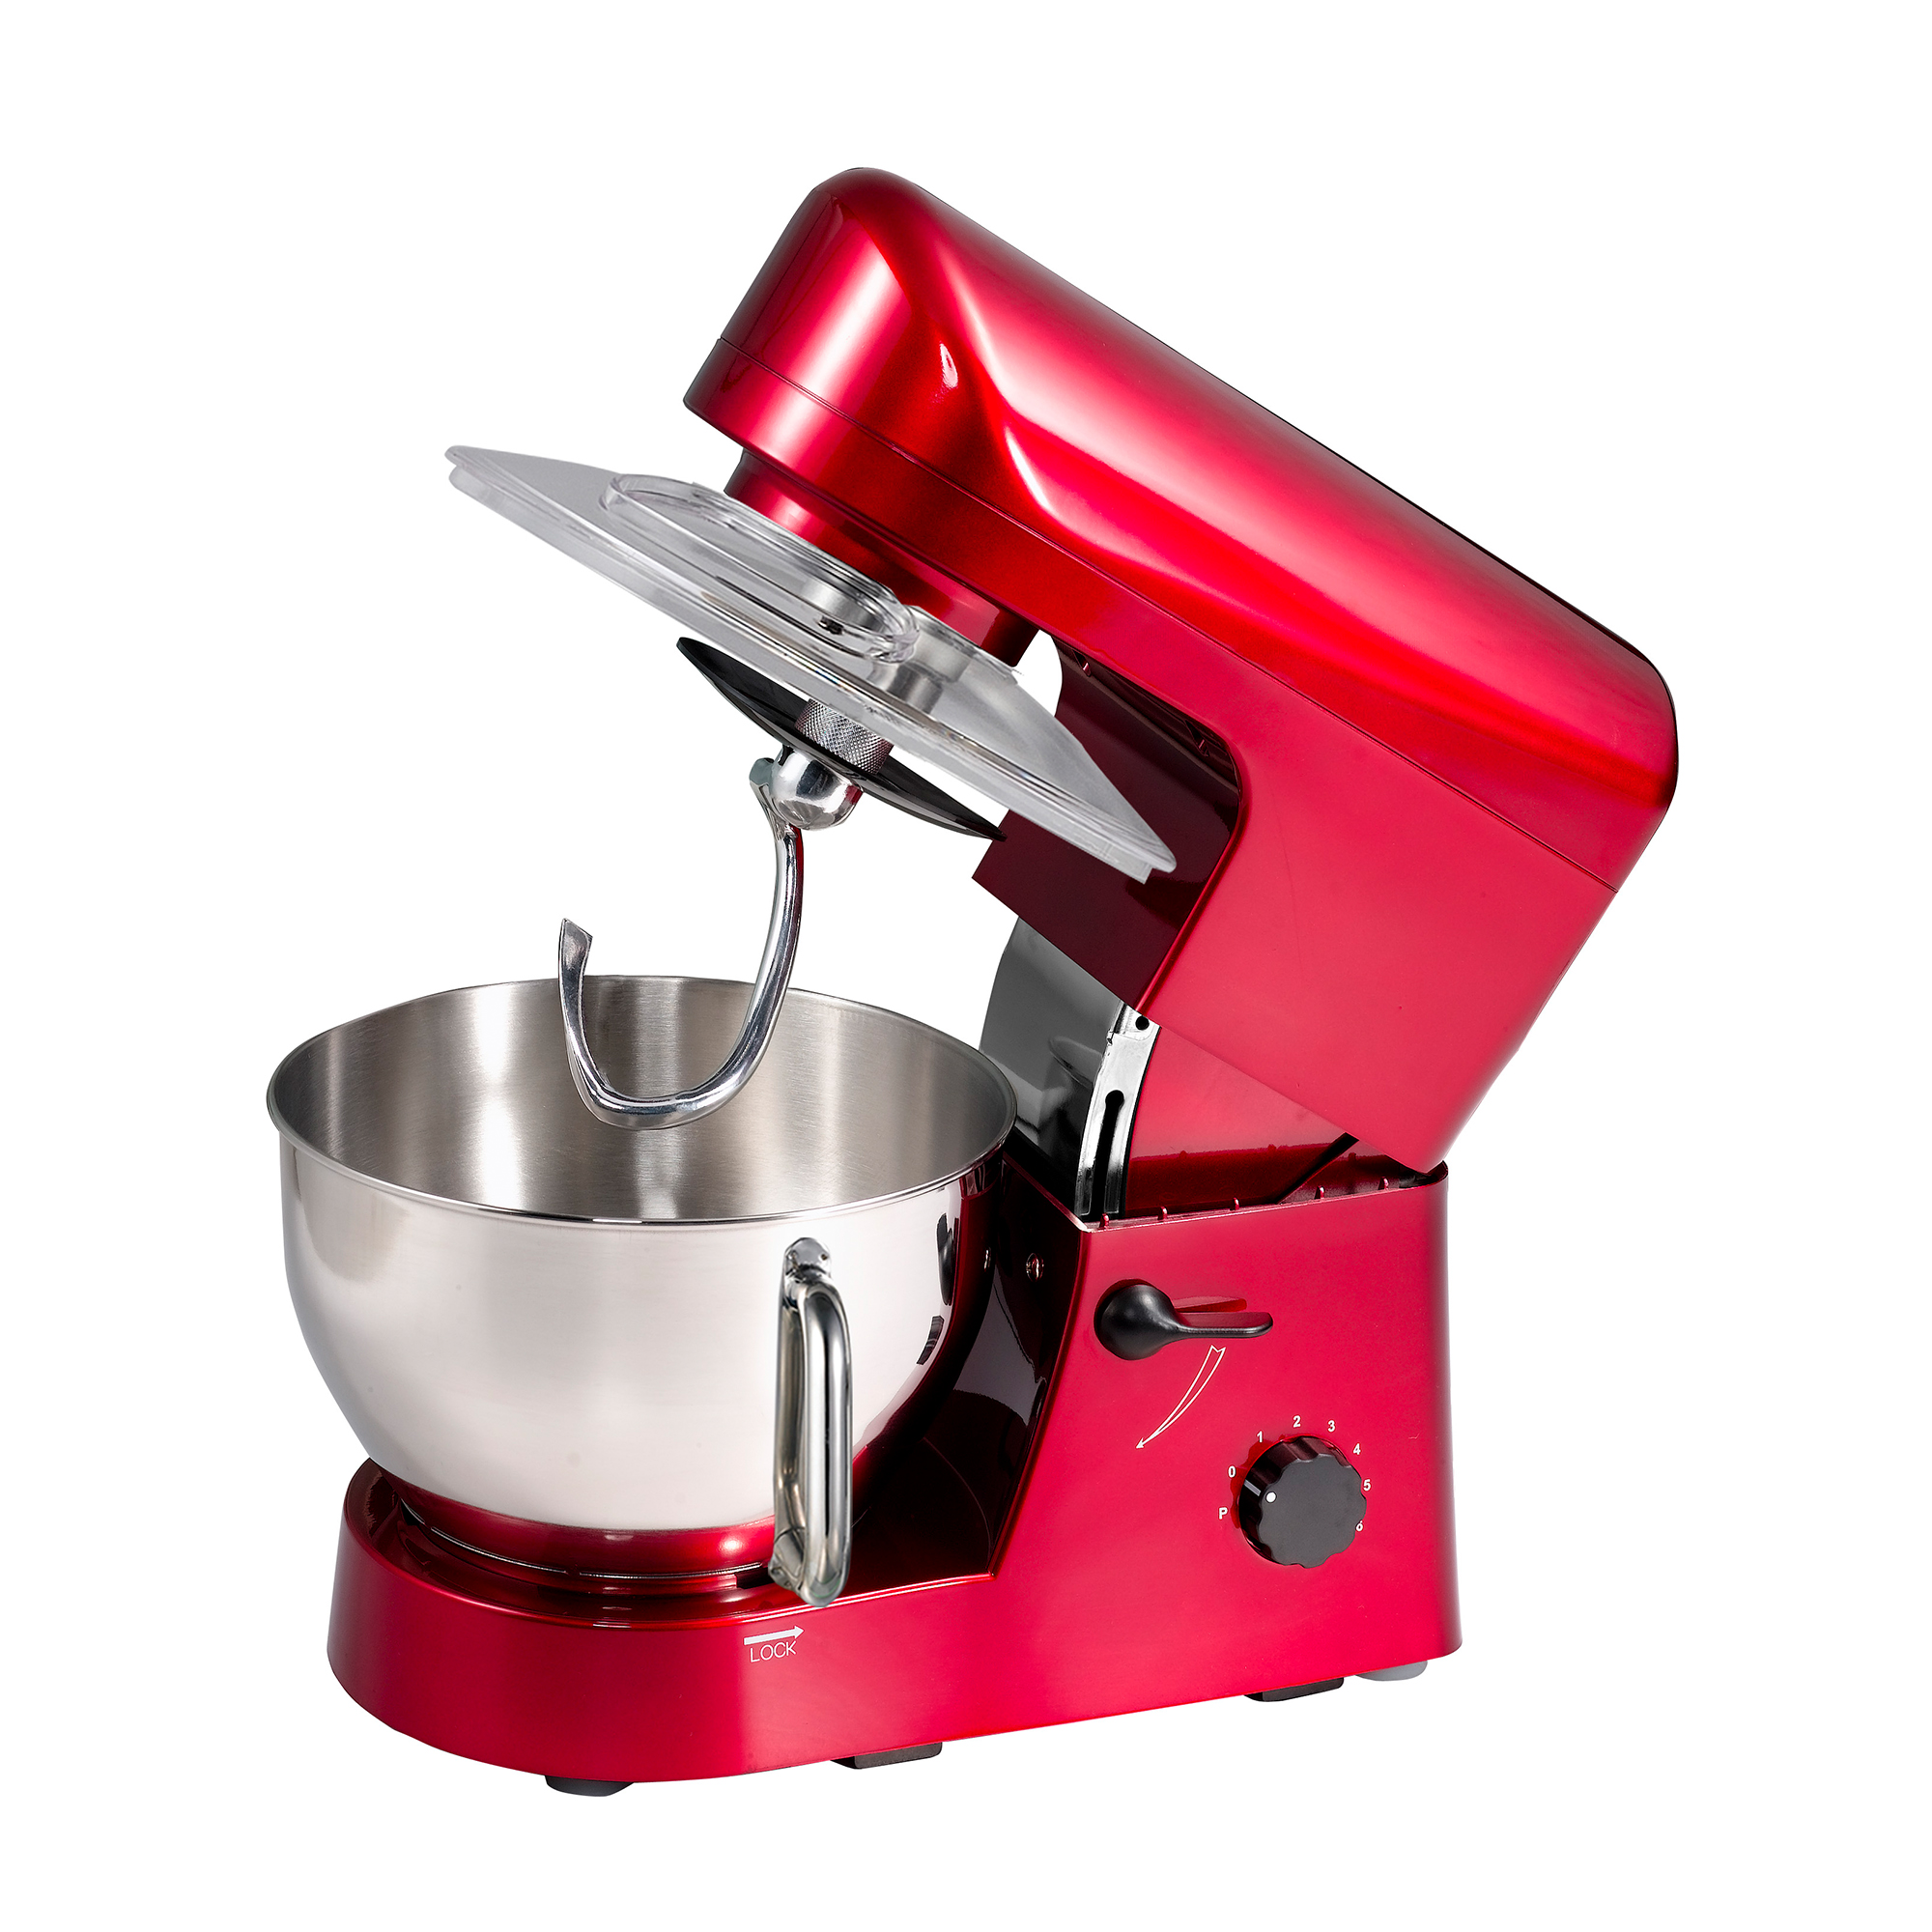 5L1200W kitchen appliances stand mixer with full metal gear system